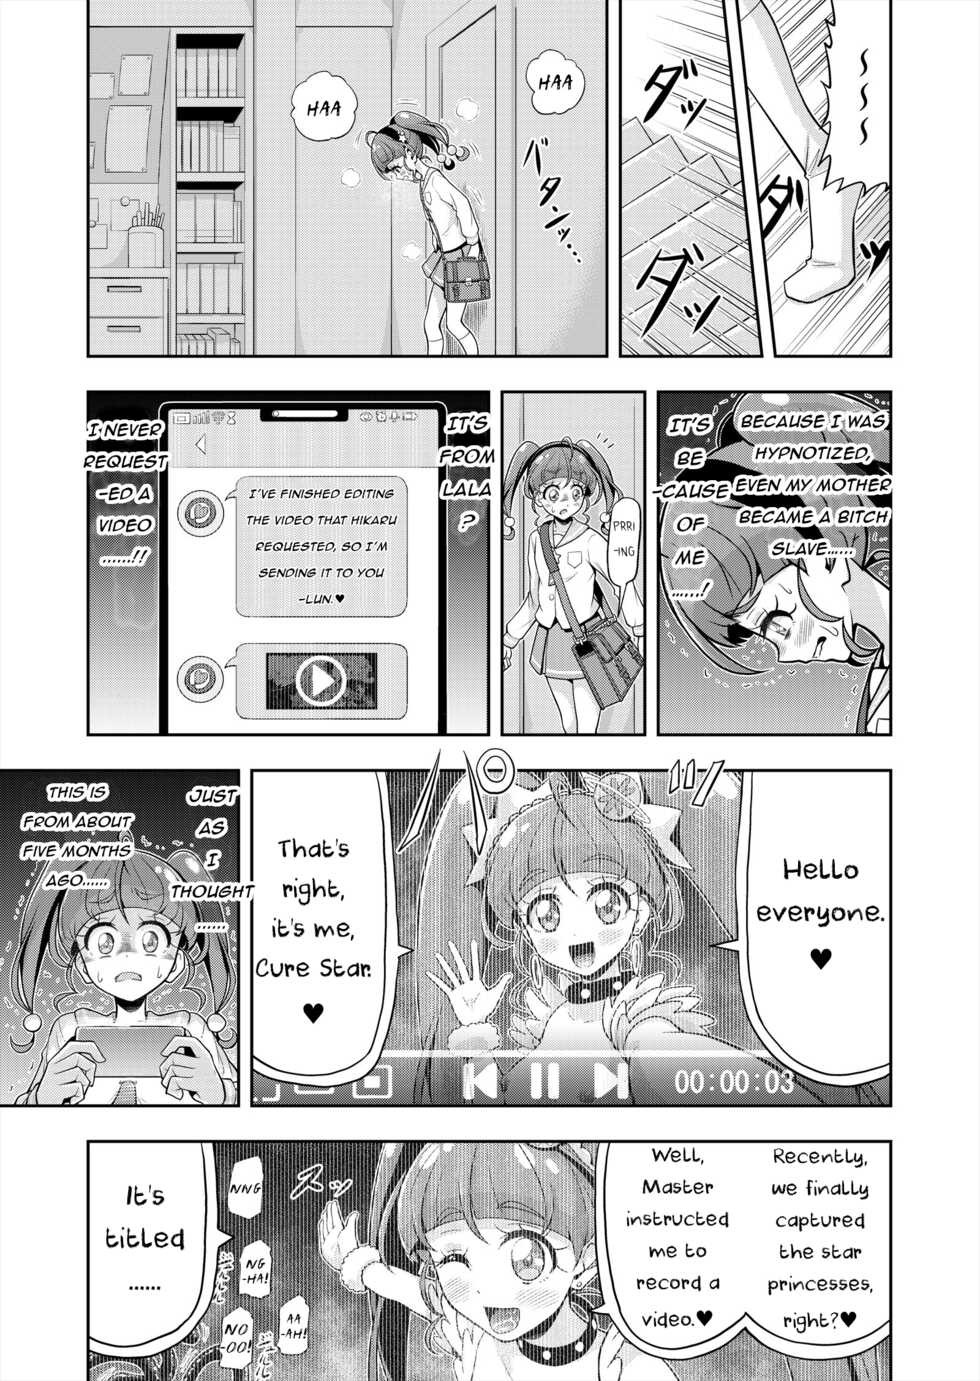 [Eclipse (Kouan)] Hoshi Asobi 2 | Star Playtime 2 Ch. 1-3 (Star Twinkle PreCure) [English] [bored_one28] [Incomplete] - Page 14